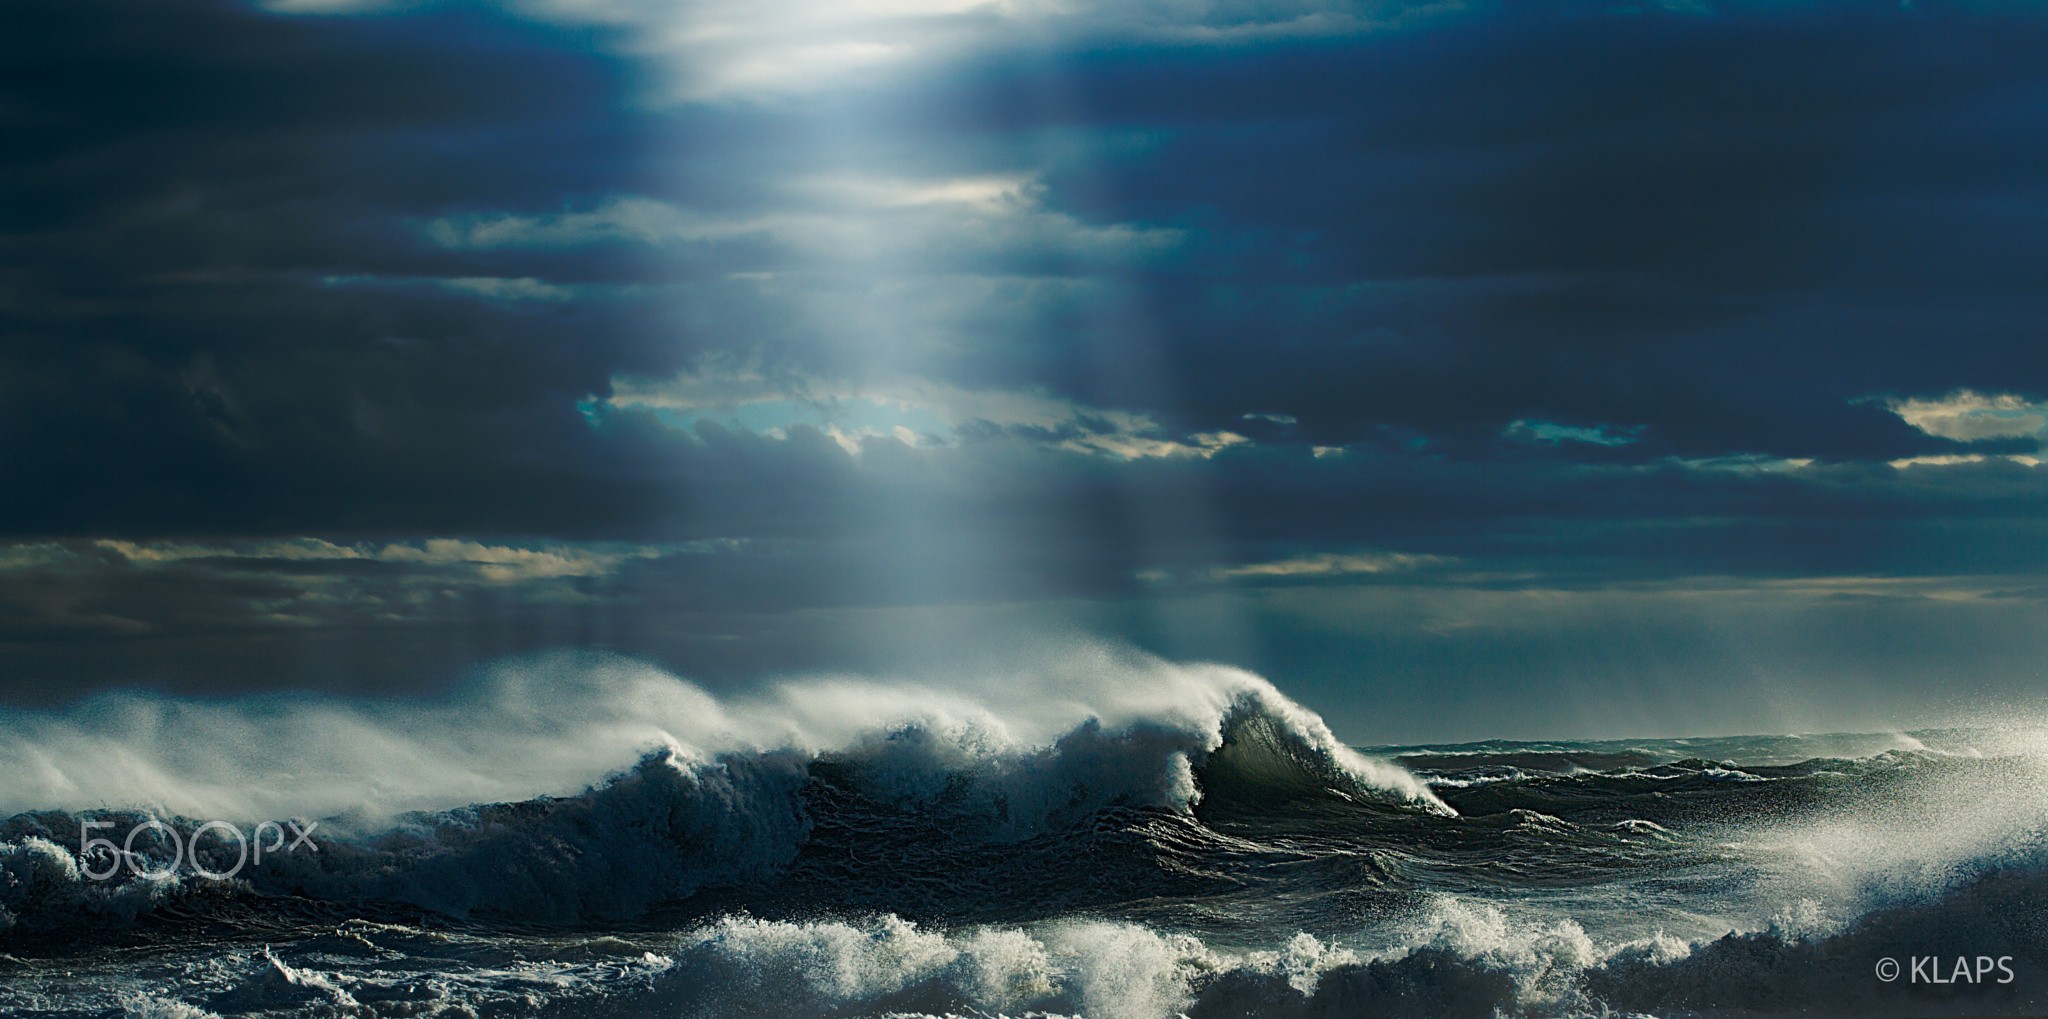 General 2048x1019 sea waves sky 500px nature storm